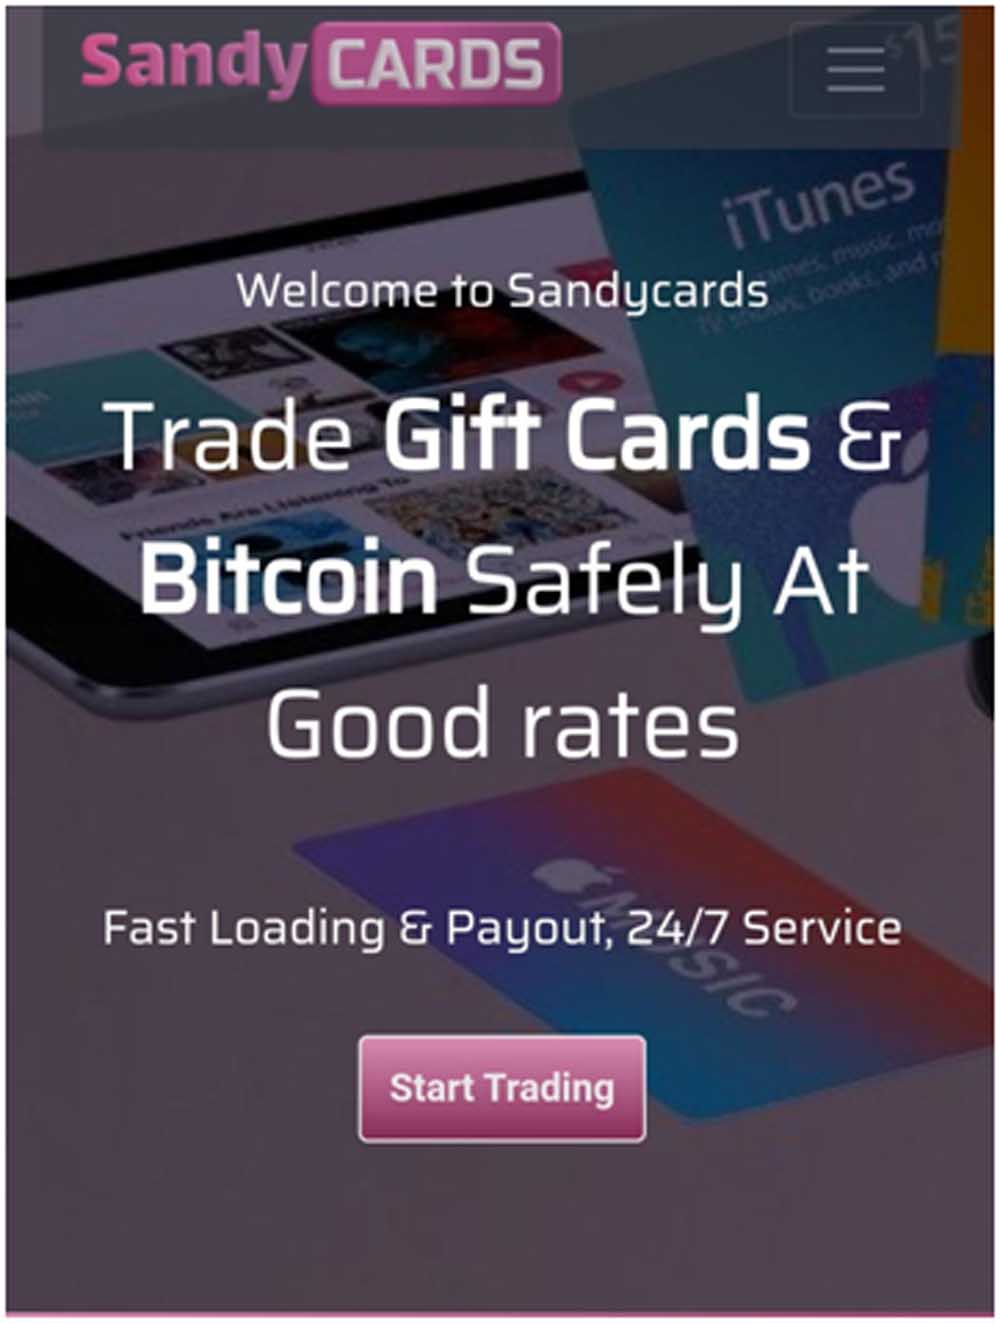 Best 2 Verified Sites To Sell Gift Cards Bitcoin And Cash App In Nigeria Sandycards Vanguard News